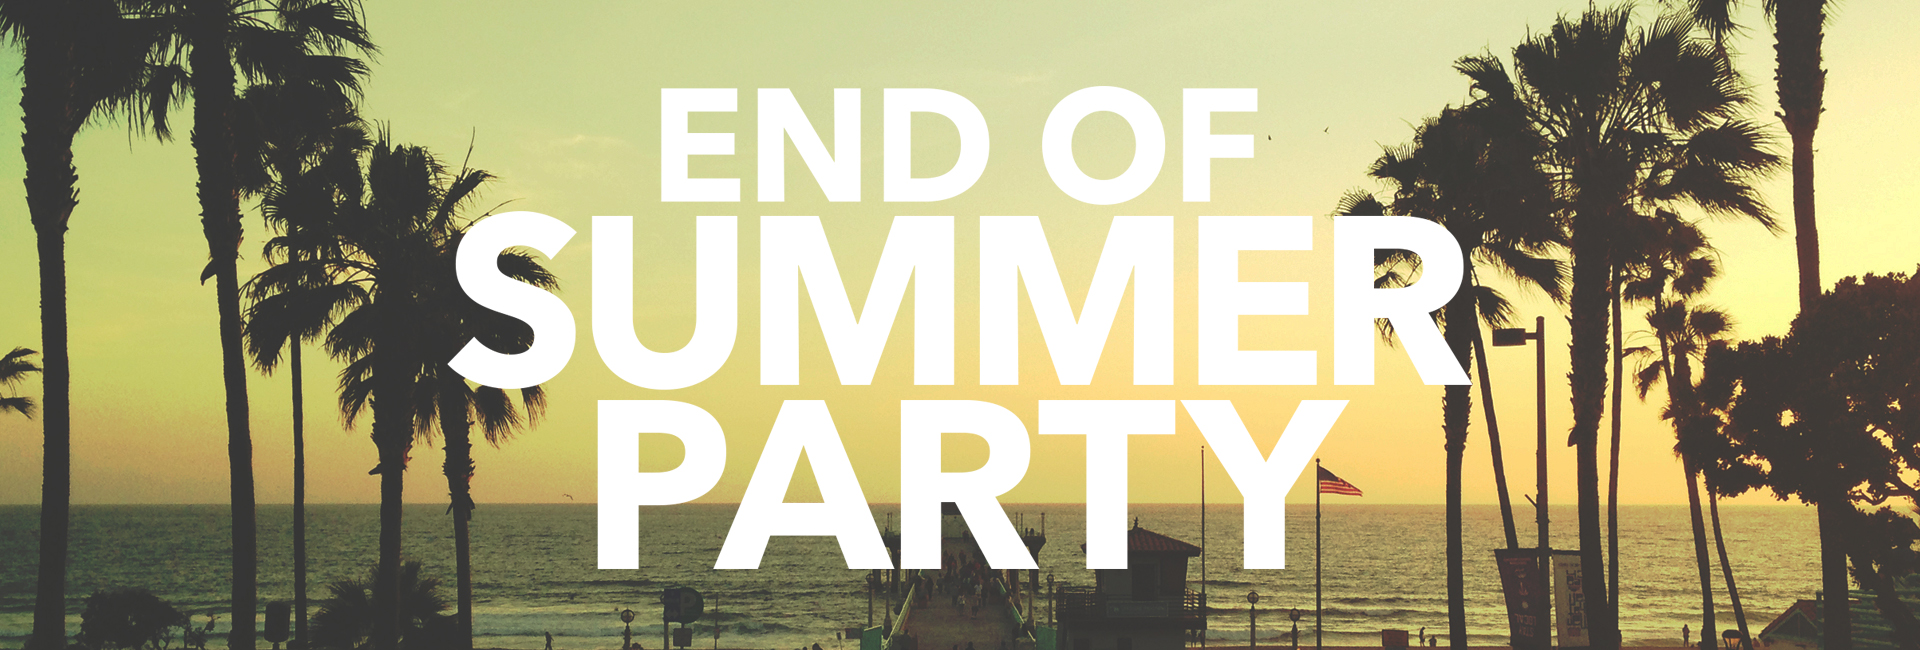 end-of-summer-party